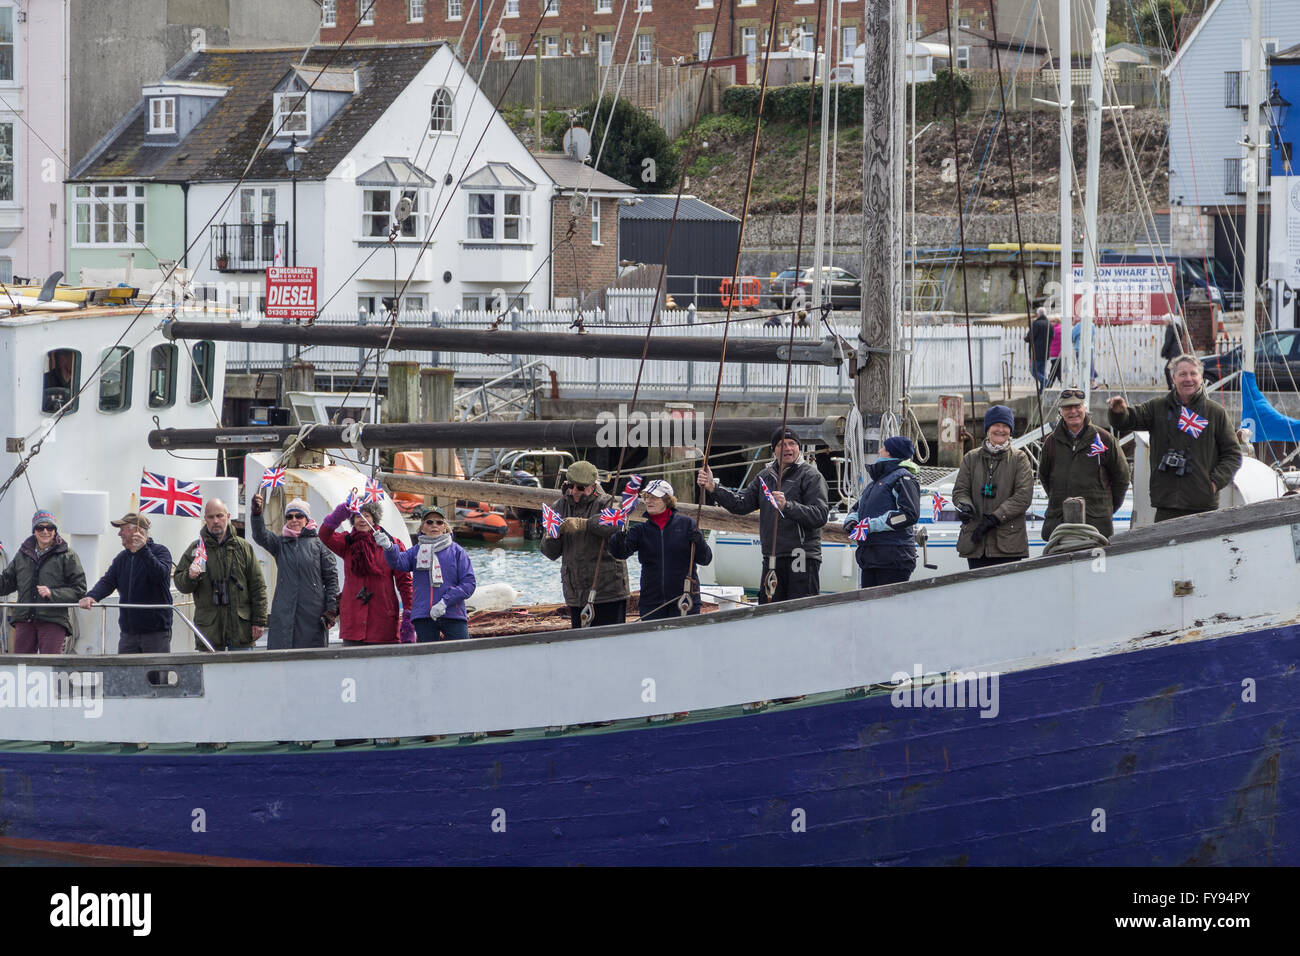 Weymouth, England. 23 April 2016. Queen's 90th Birthday Floating Tribute. Stella Ann Fishing boat, people waving flags. Credit:  Frances Underwood/Alamy Live News Stock Photo